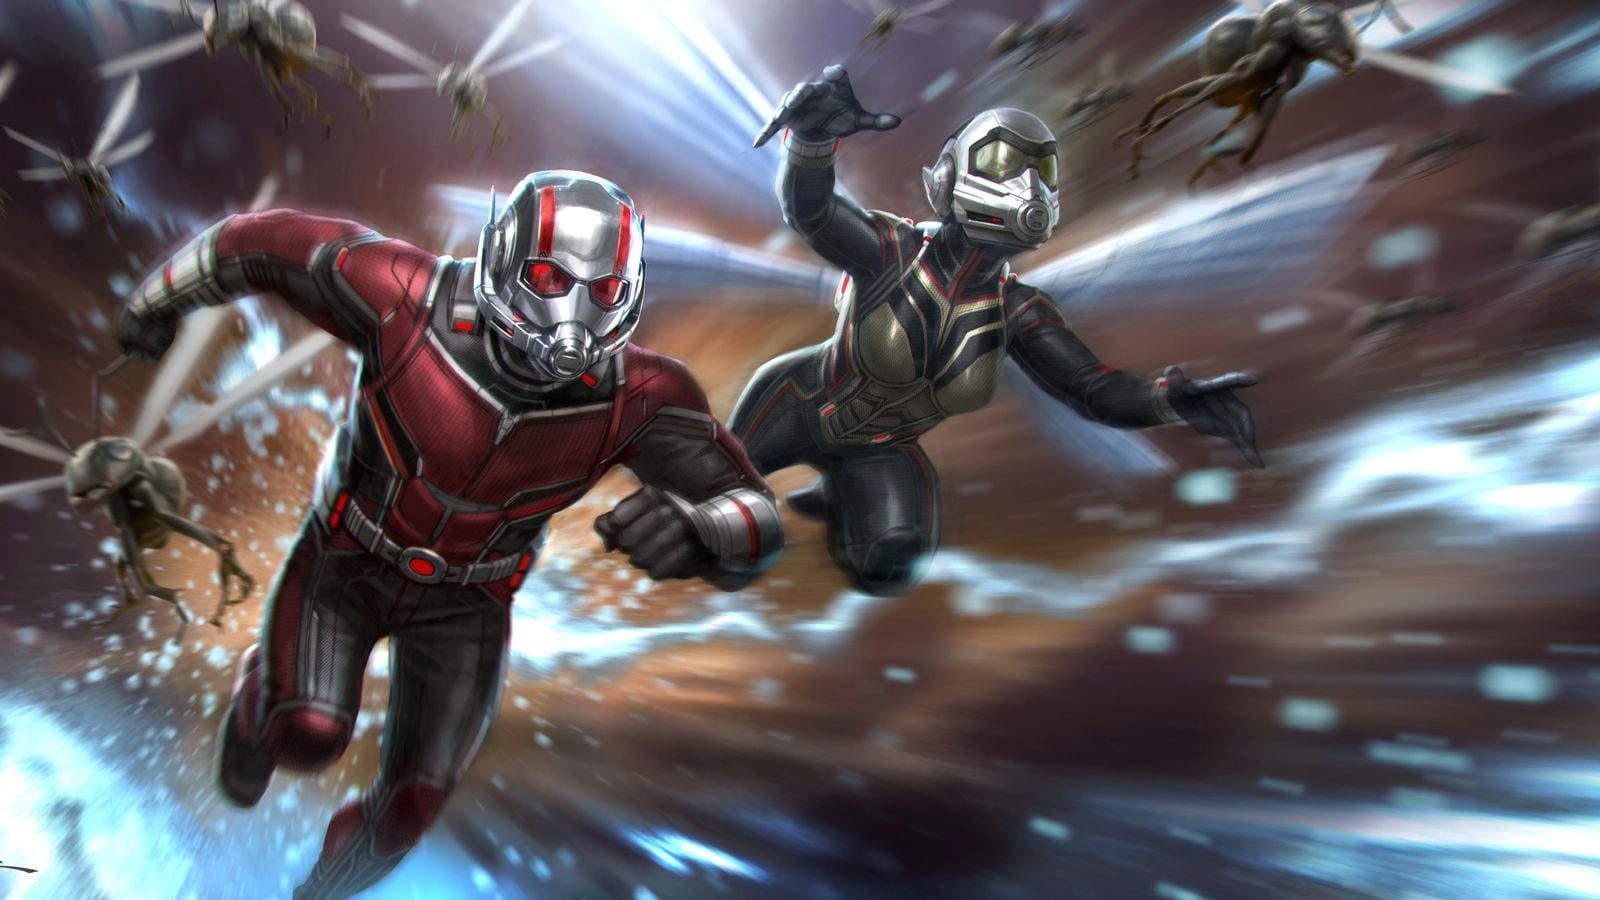 Marvel's Ant-Man and the Wasp director on the prospect of Ant-Man 3